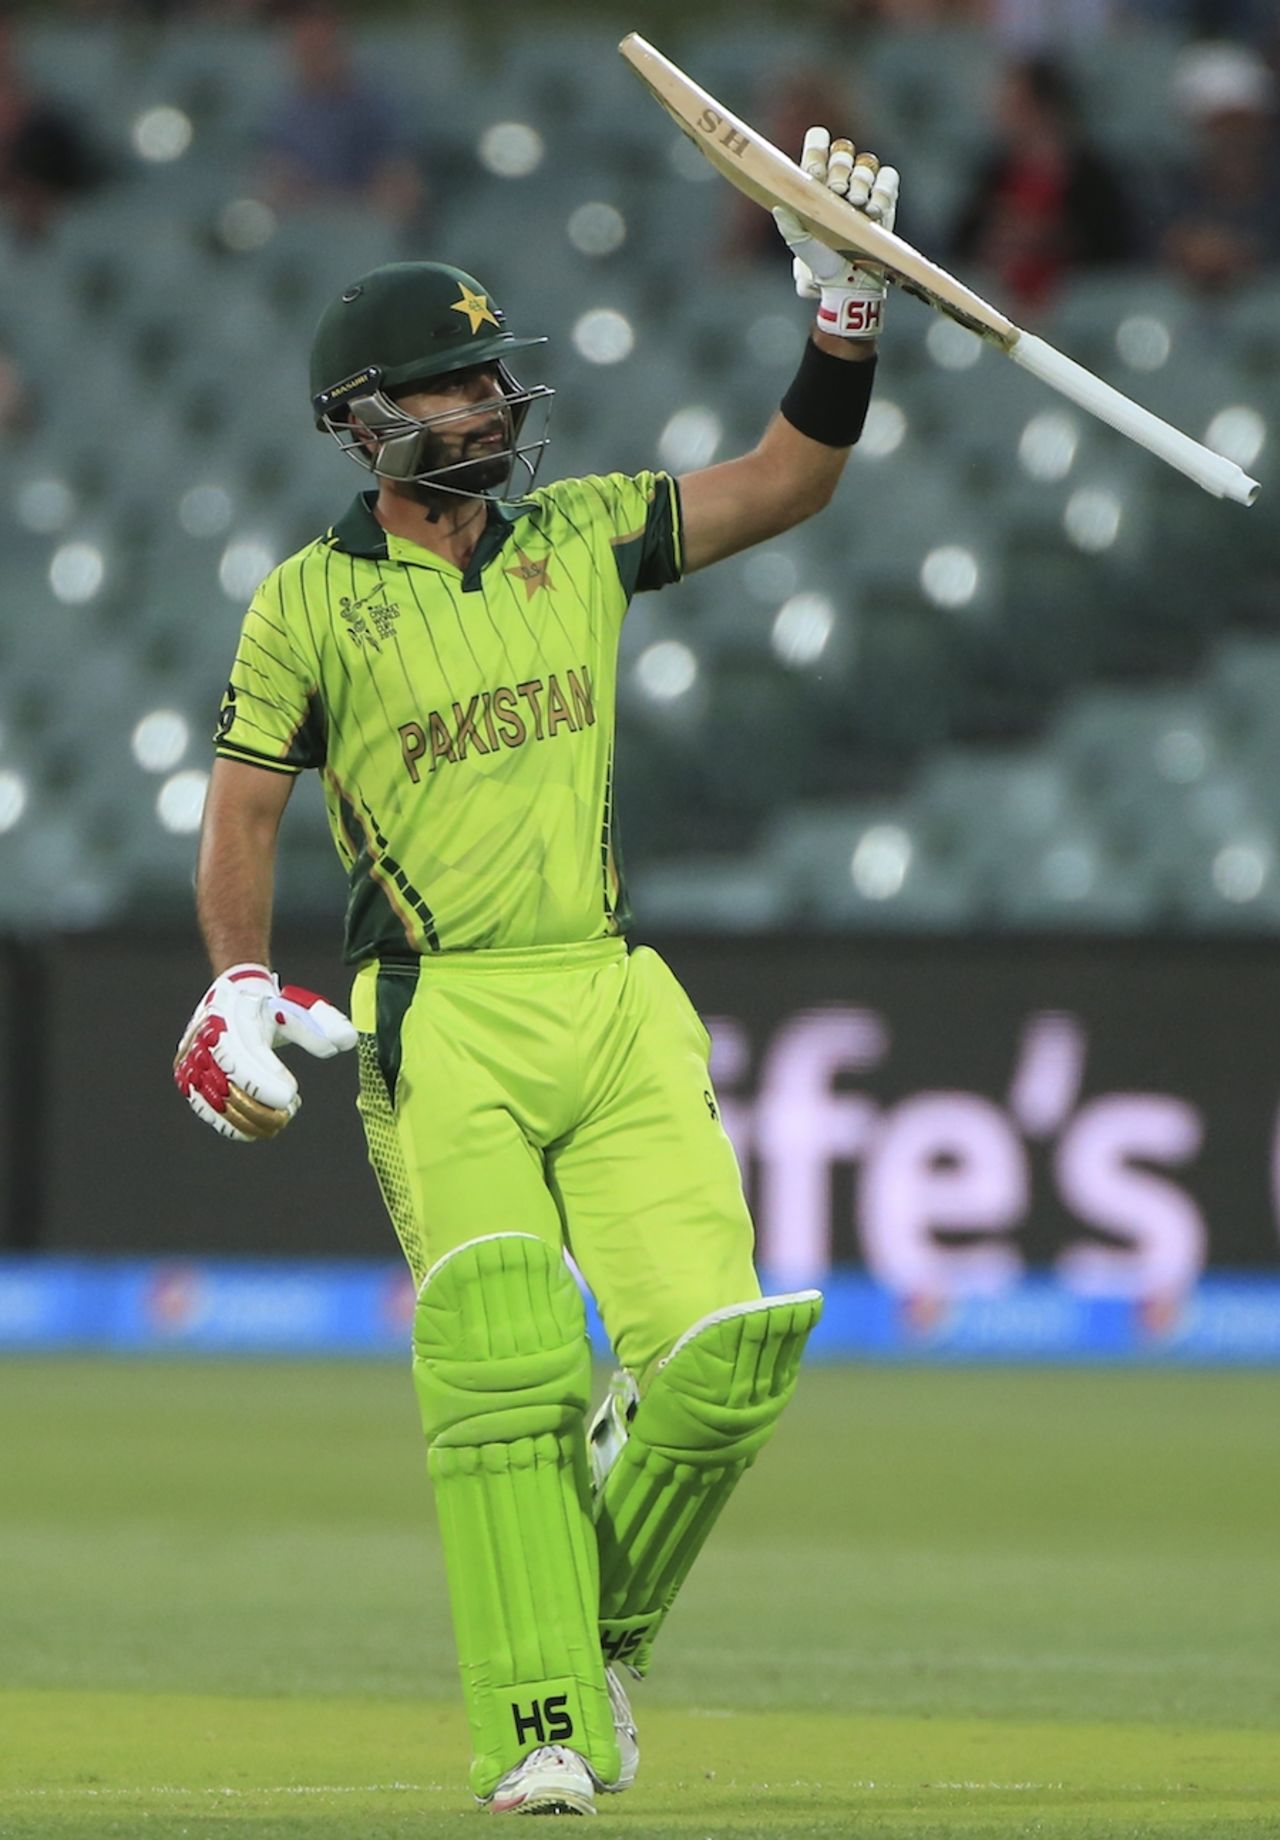 Ahmed Shehzad celebrates his 12th ODI fifty, Ireland v Pakistan, World Cup 2015, Group B, Adelaide, March 15, 2015